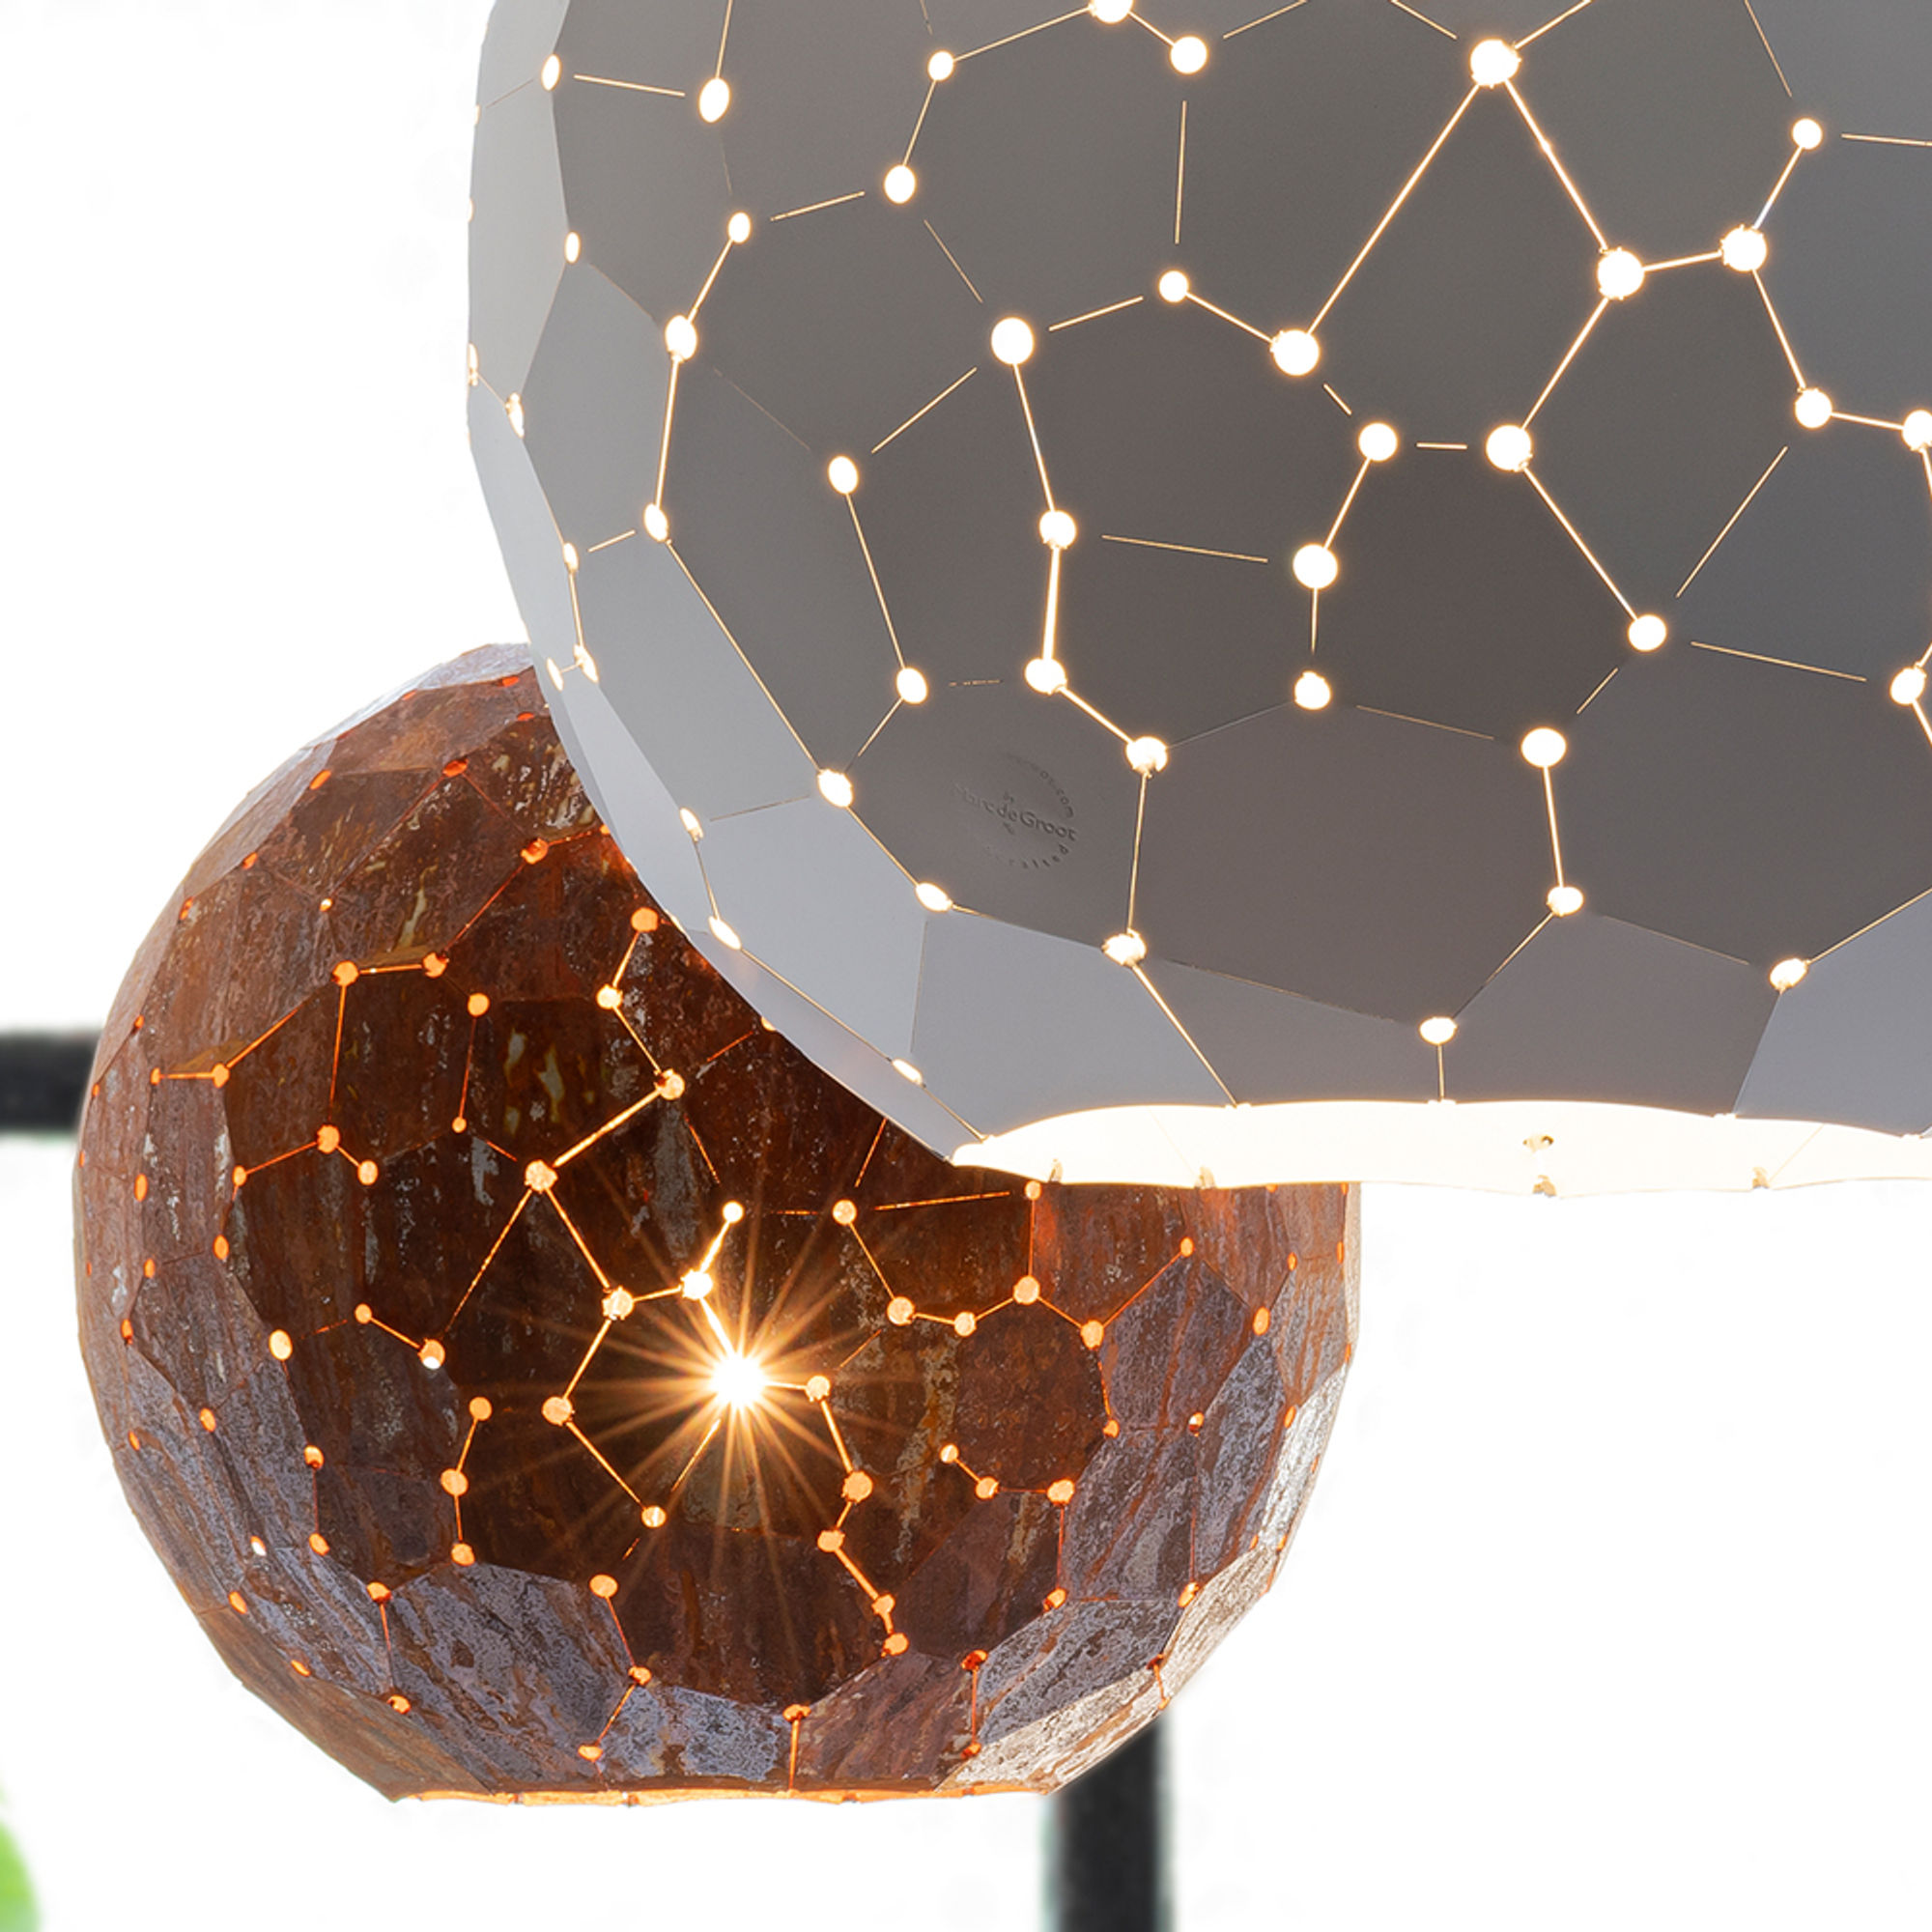 The StarDust 40 Pendant by By Marc de Groot 2